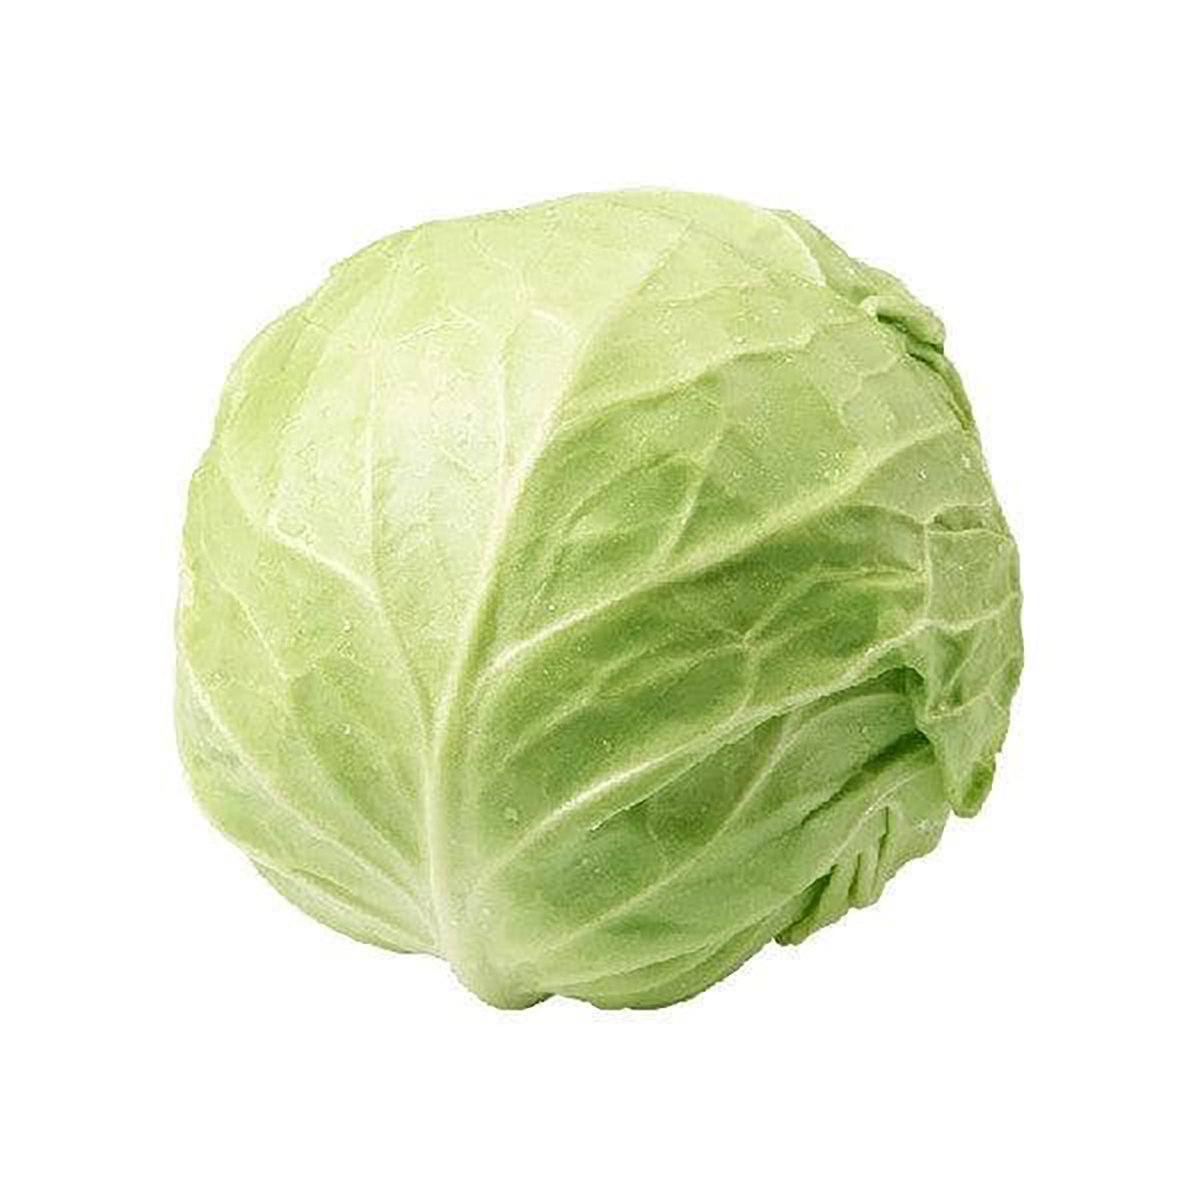 Beijing Cabbage 500g Approx Weight